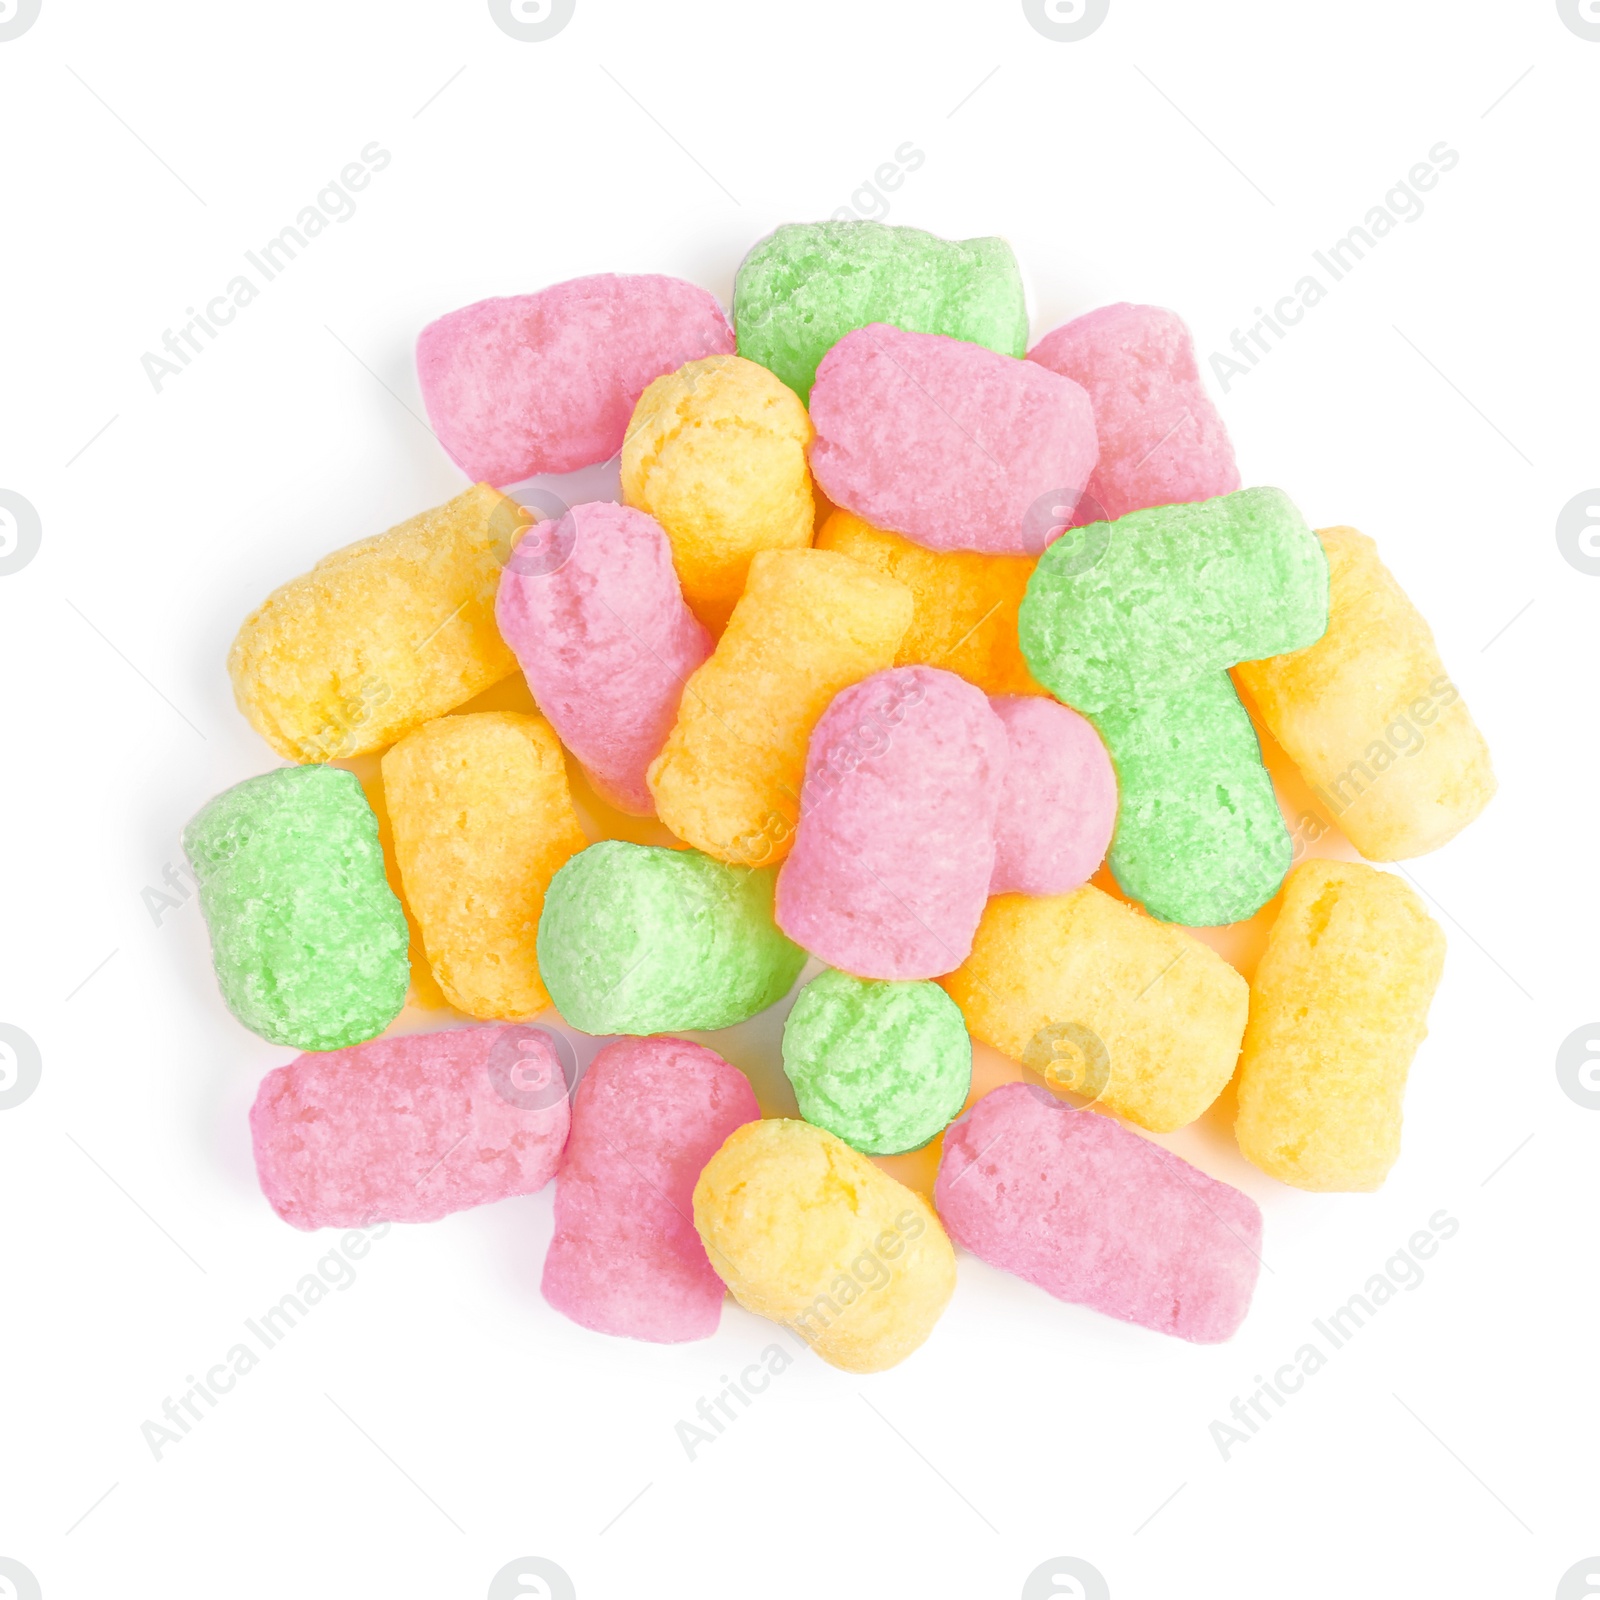 Image of Pile of colorful corn puffs on white background, top view